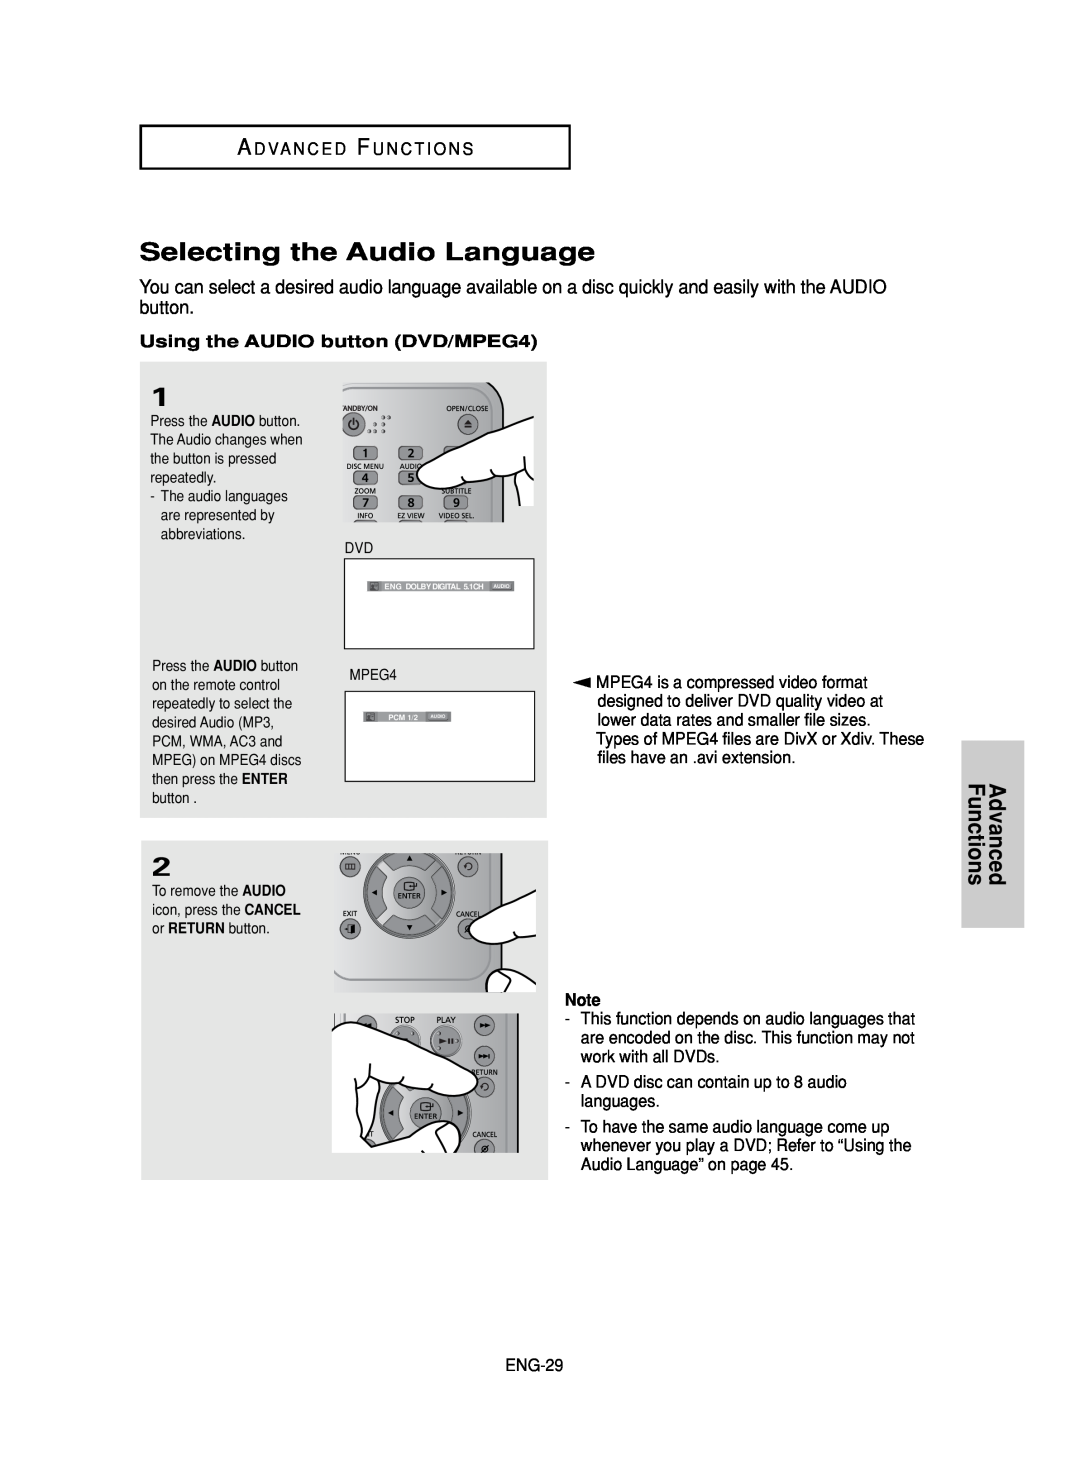 Samsung DVD-F1080, DVD-FP580 manual Selecting the Audio Language, Using the AUDIO button DVD/MPEG4 